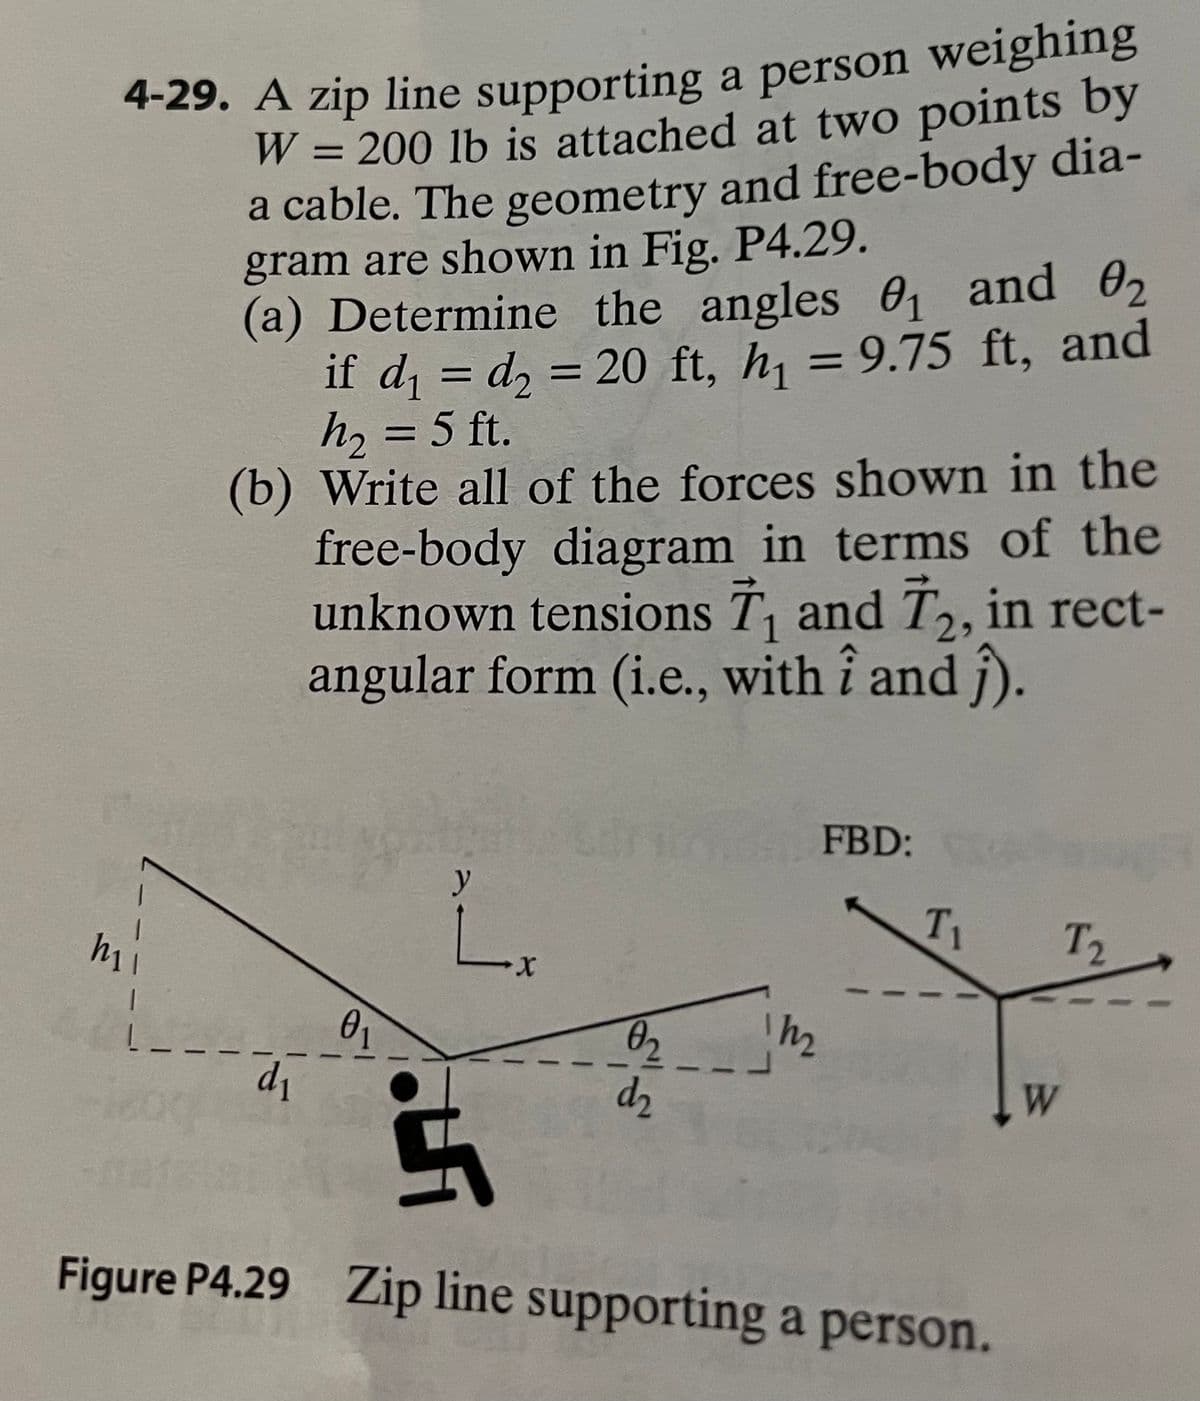 4-29. A zip line supporting a person weighing
W = 200 lb is attached at two points by
a cable. The geometry and free-body dia-
gram are shown in Fig. P4.29.
(a) Determine the angles 0, and 02
if d = d, = 20 ft, h, = 9.75 ft, and
h, = 5 ft.
(b) Write all of the forces shown in the
free-body diagram in terms of the
unknown tensions T, and T, in rect-
angular form (i.e., with î and ĵ).
1
FBD:
y
T1
T2
X.
h2
02
d2
d1
W
Figure P4.29 Zip line supporting a person.
